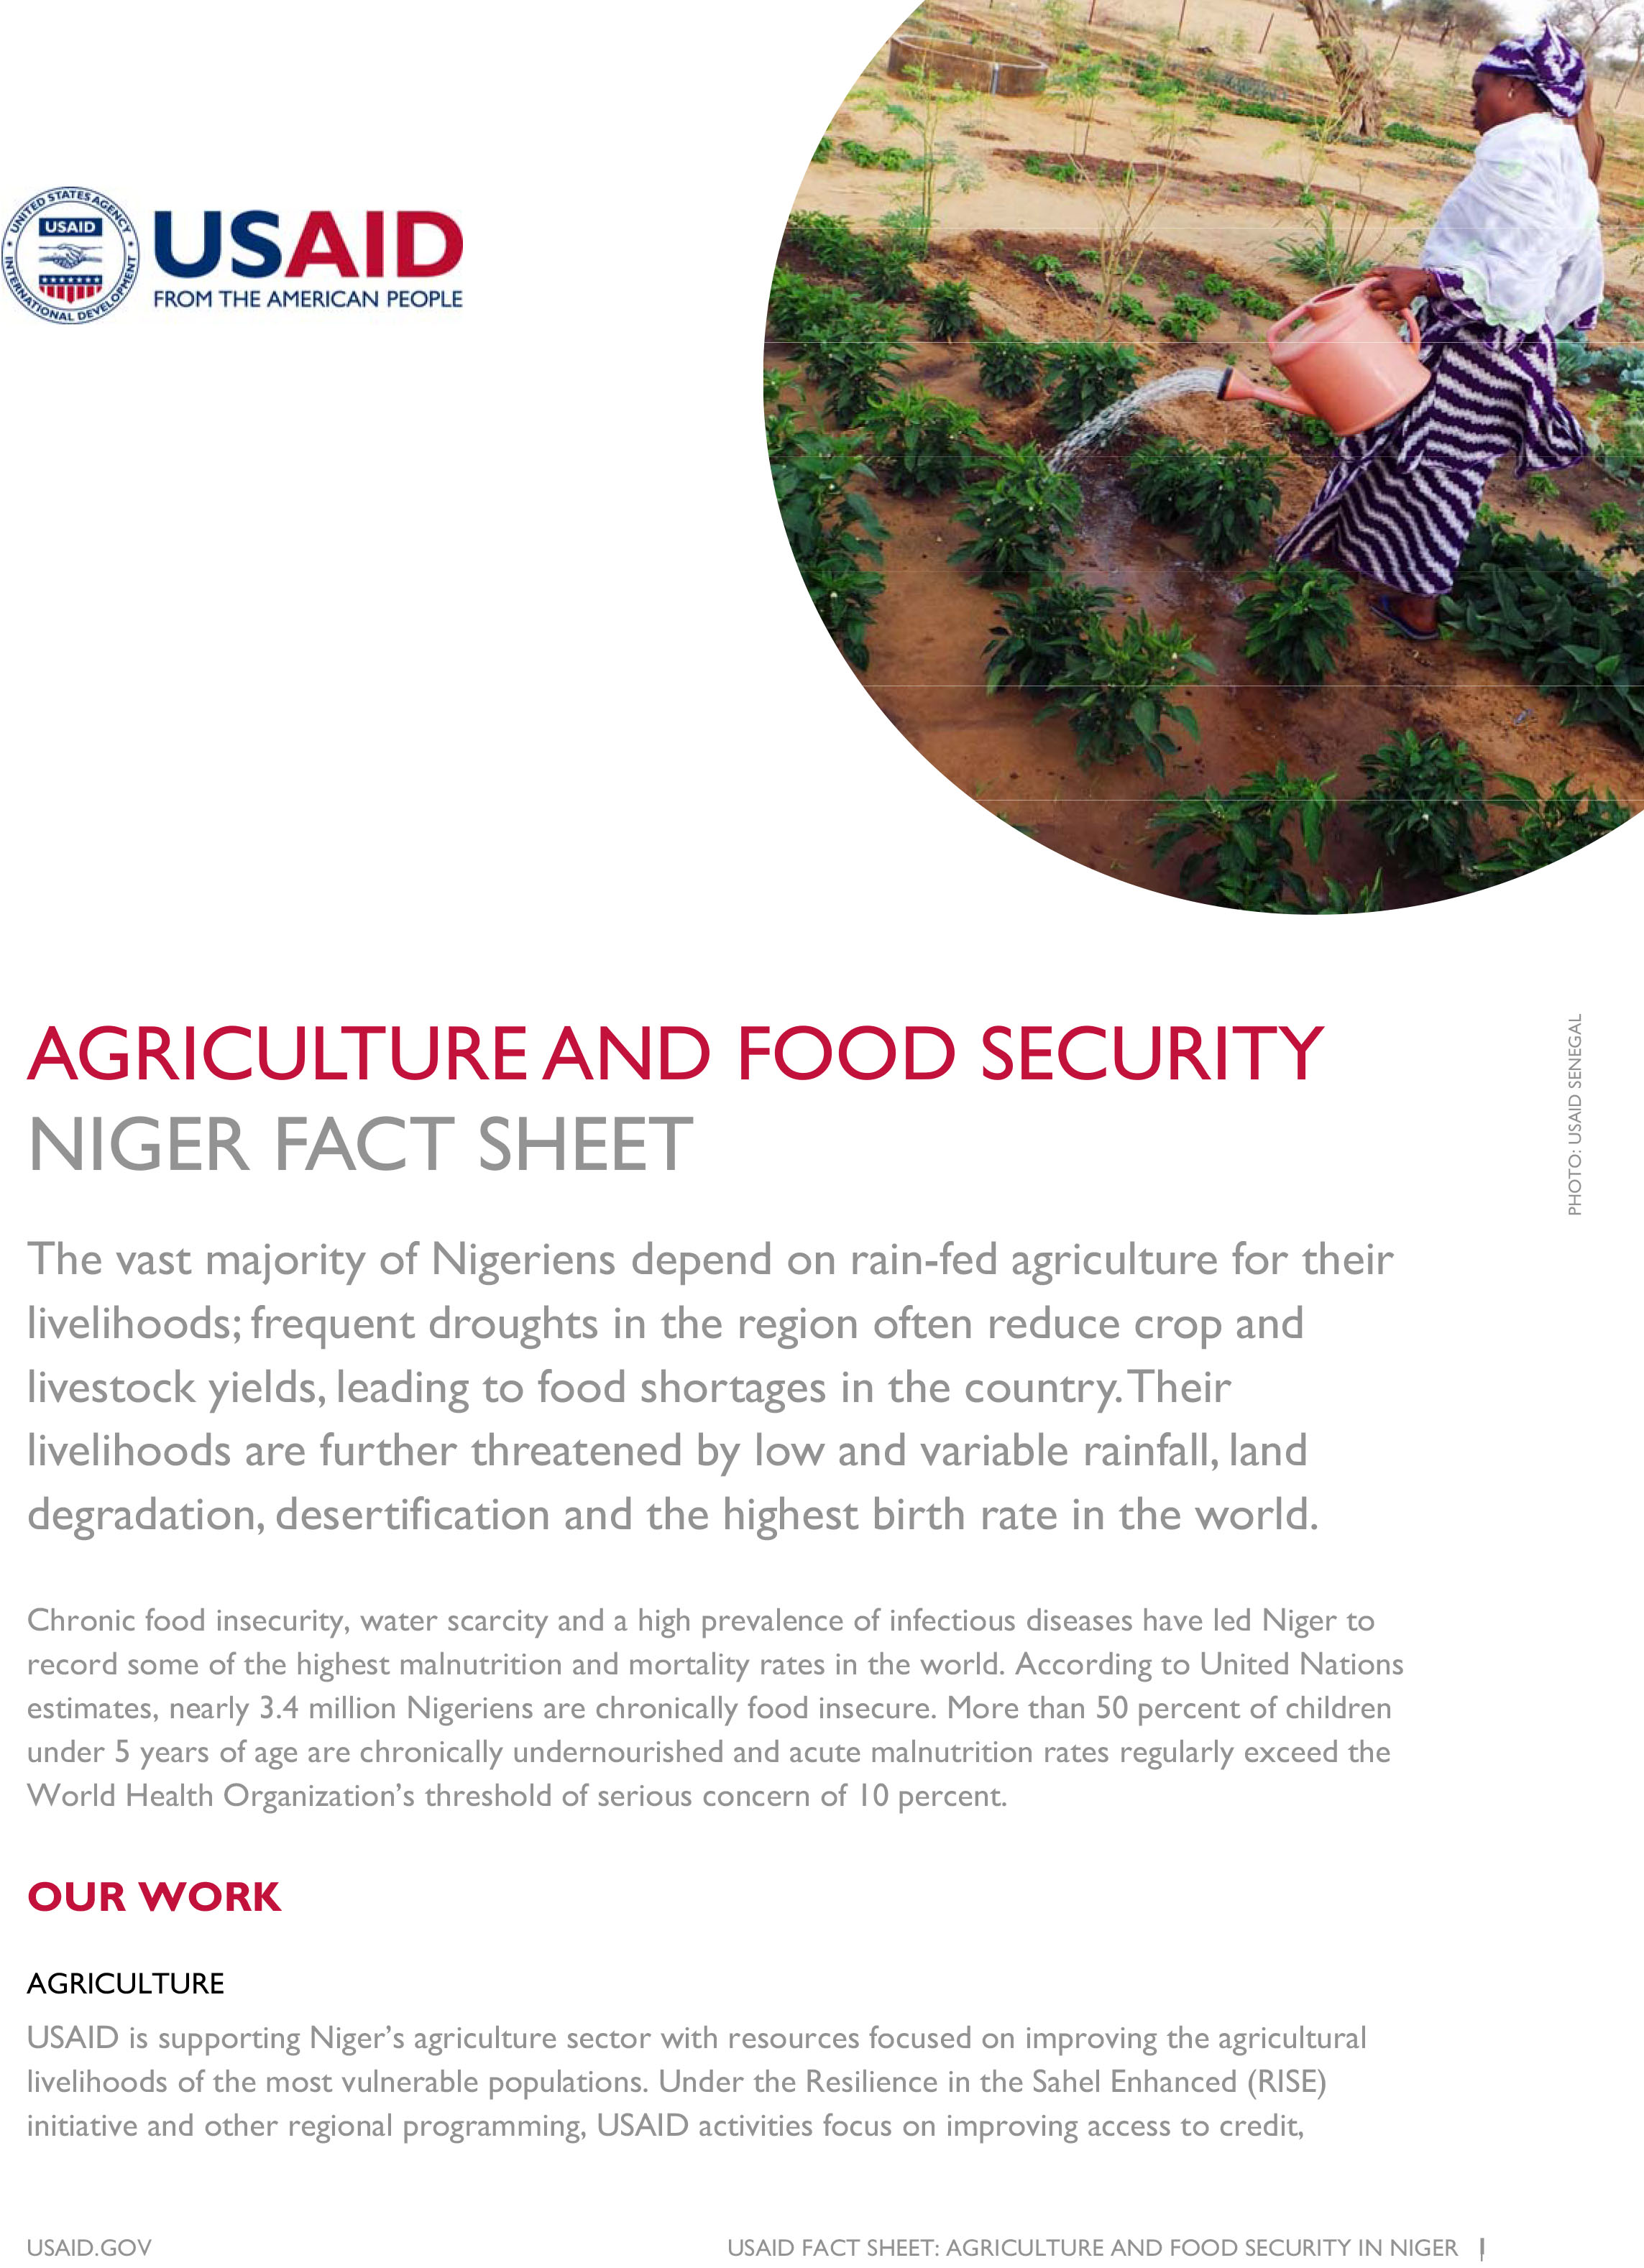 Niger Agriculture & Food Security Fact Sheet